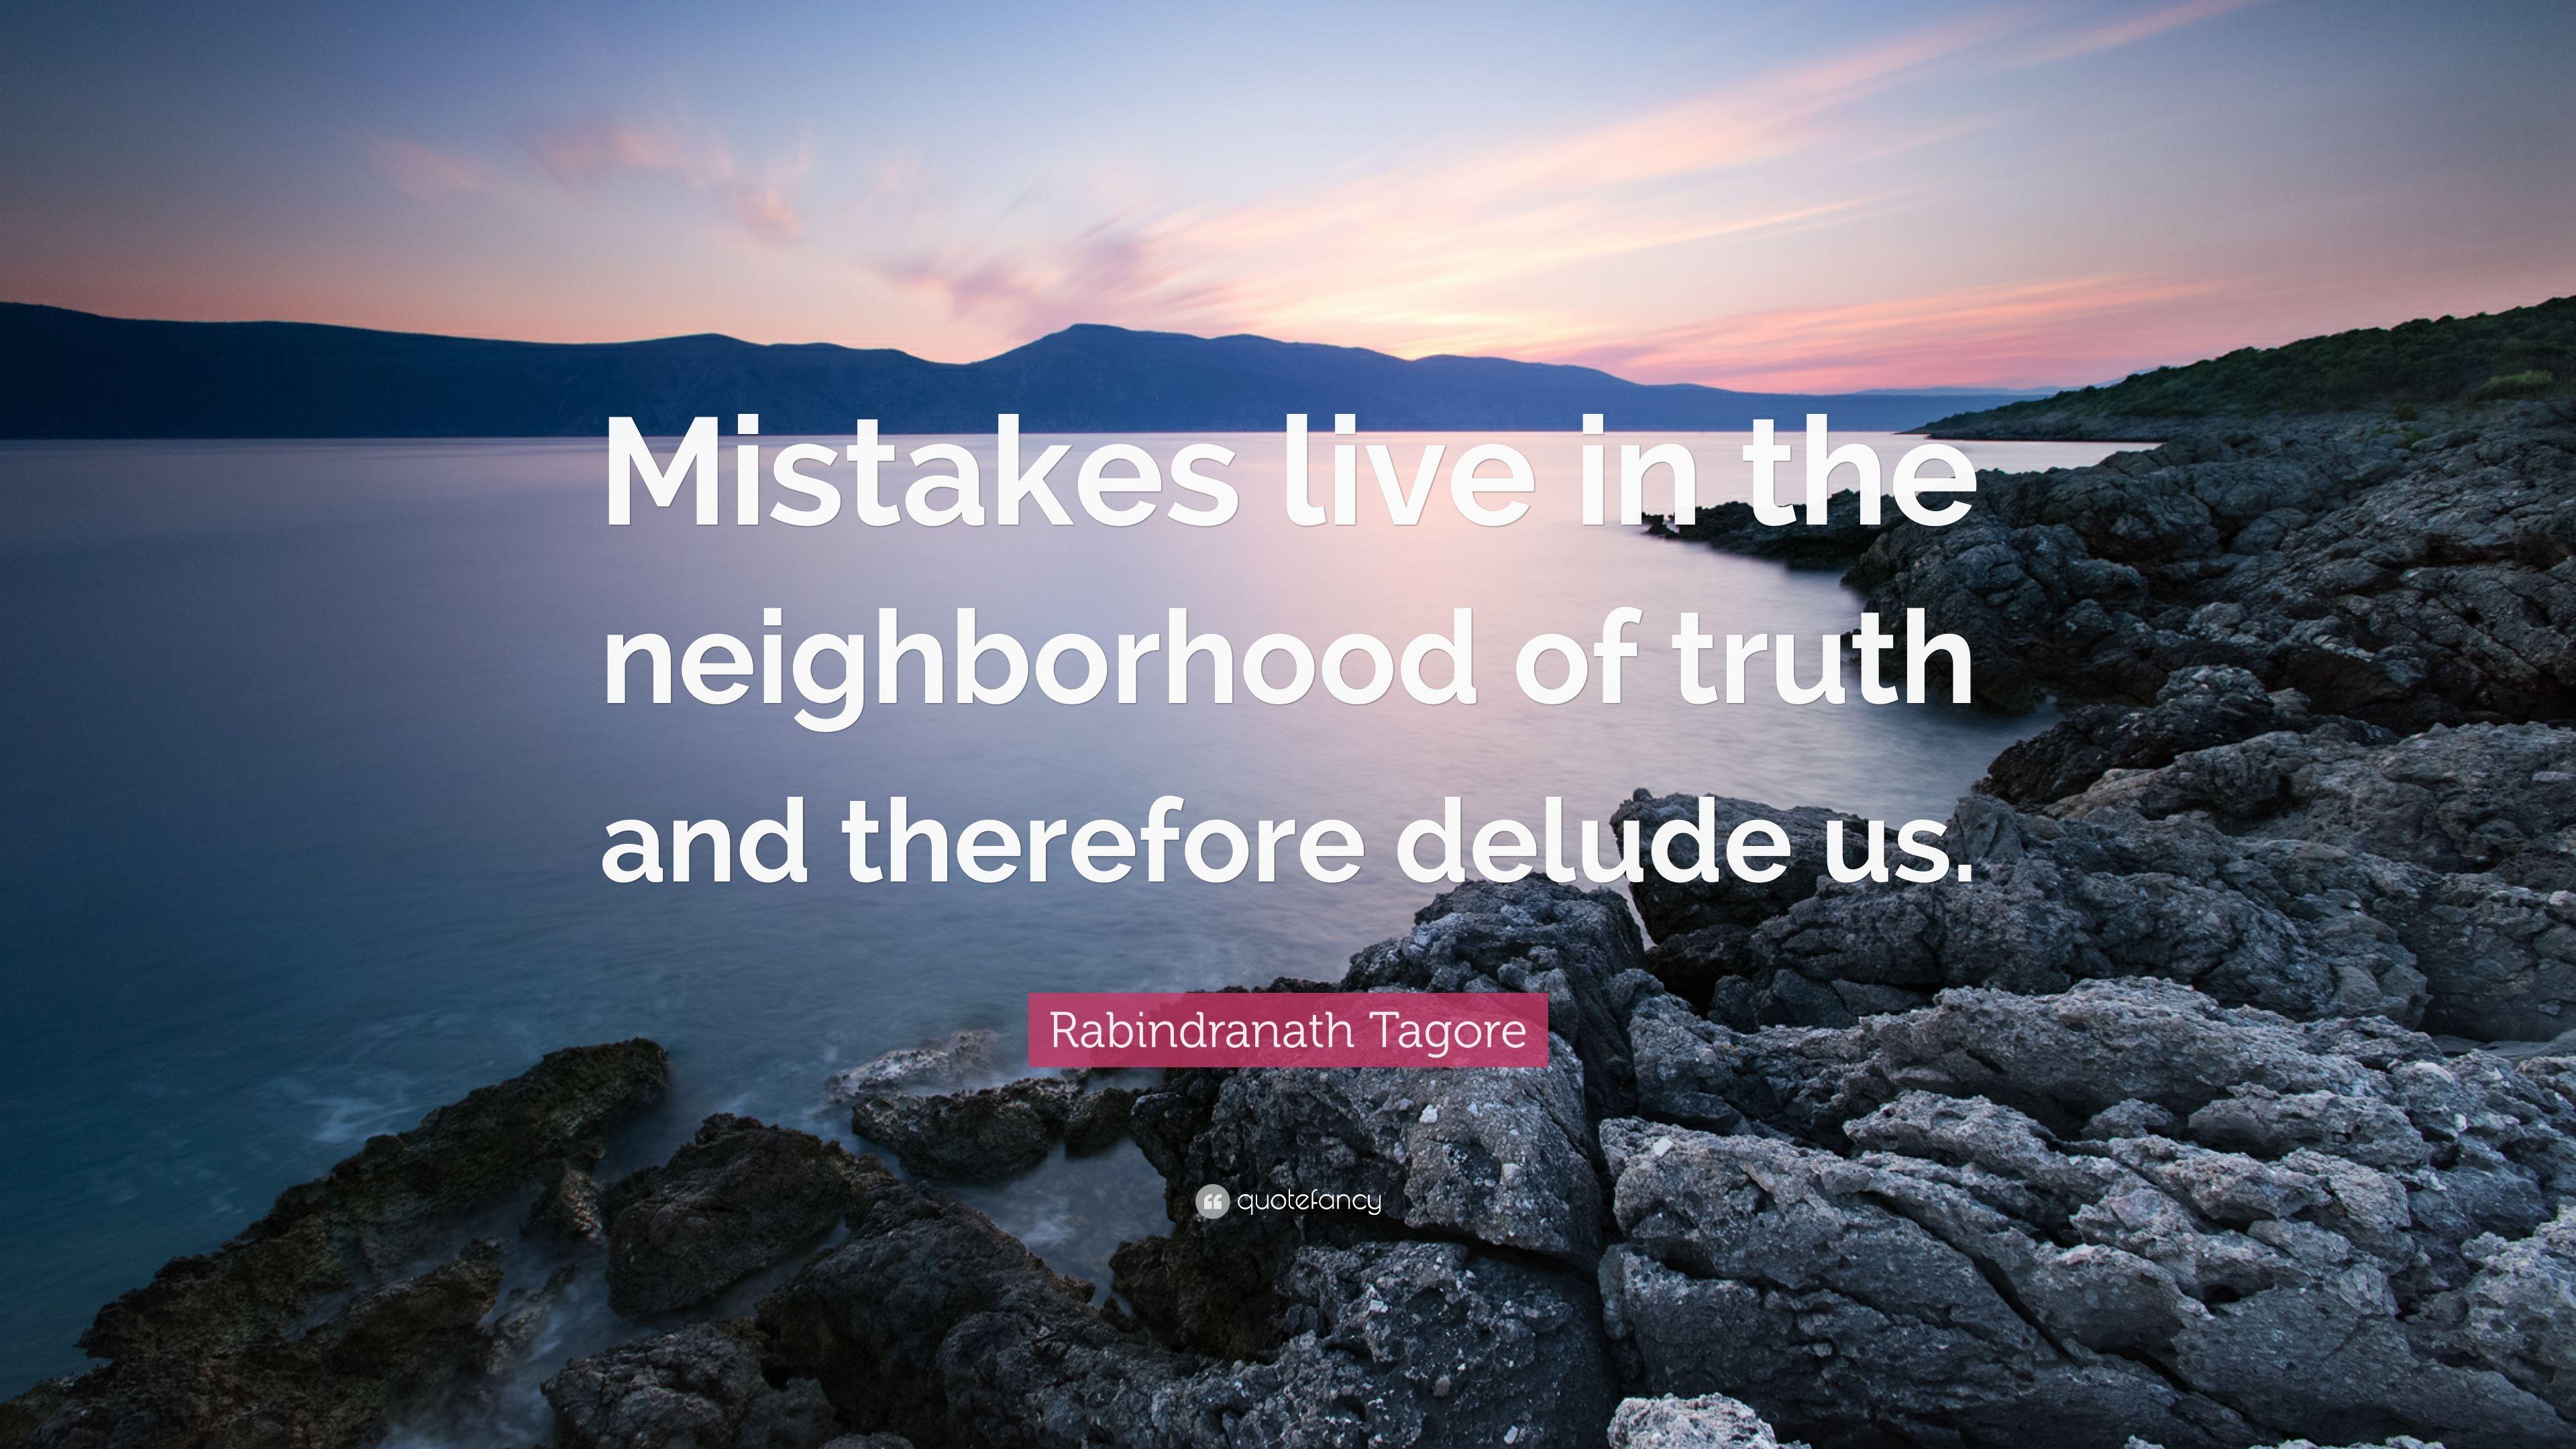 Rabindranath Tagore Quote: “Mistakes live in the neighborhood